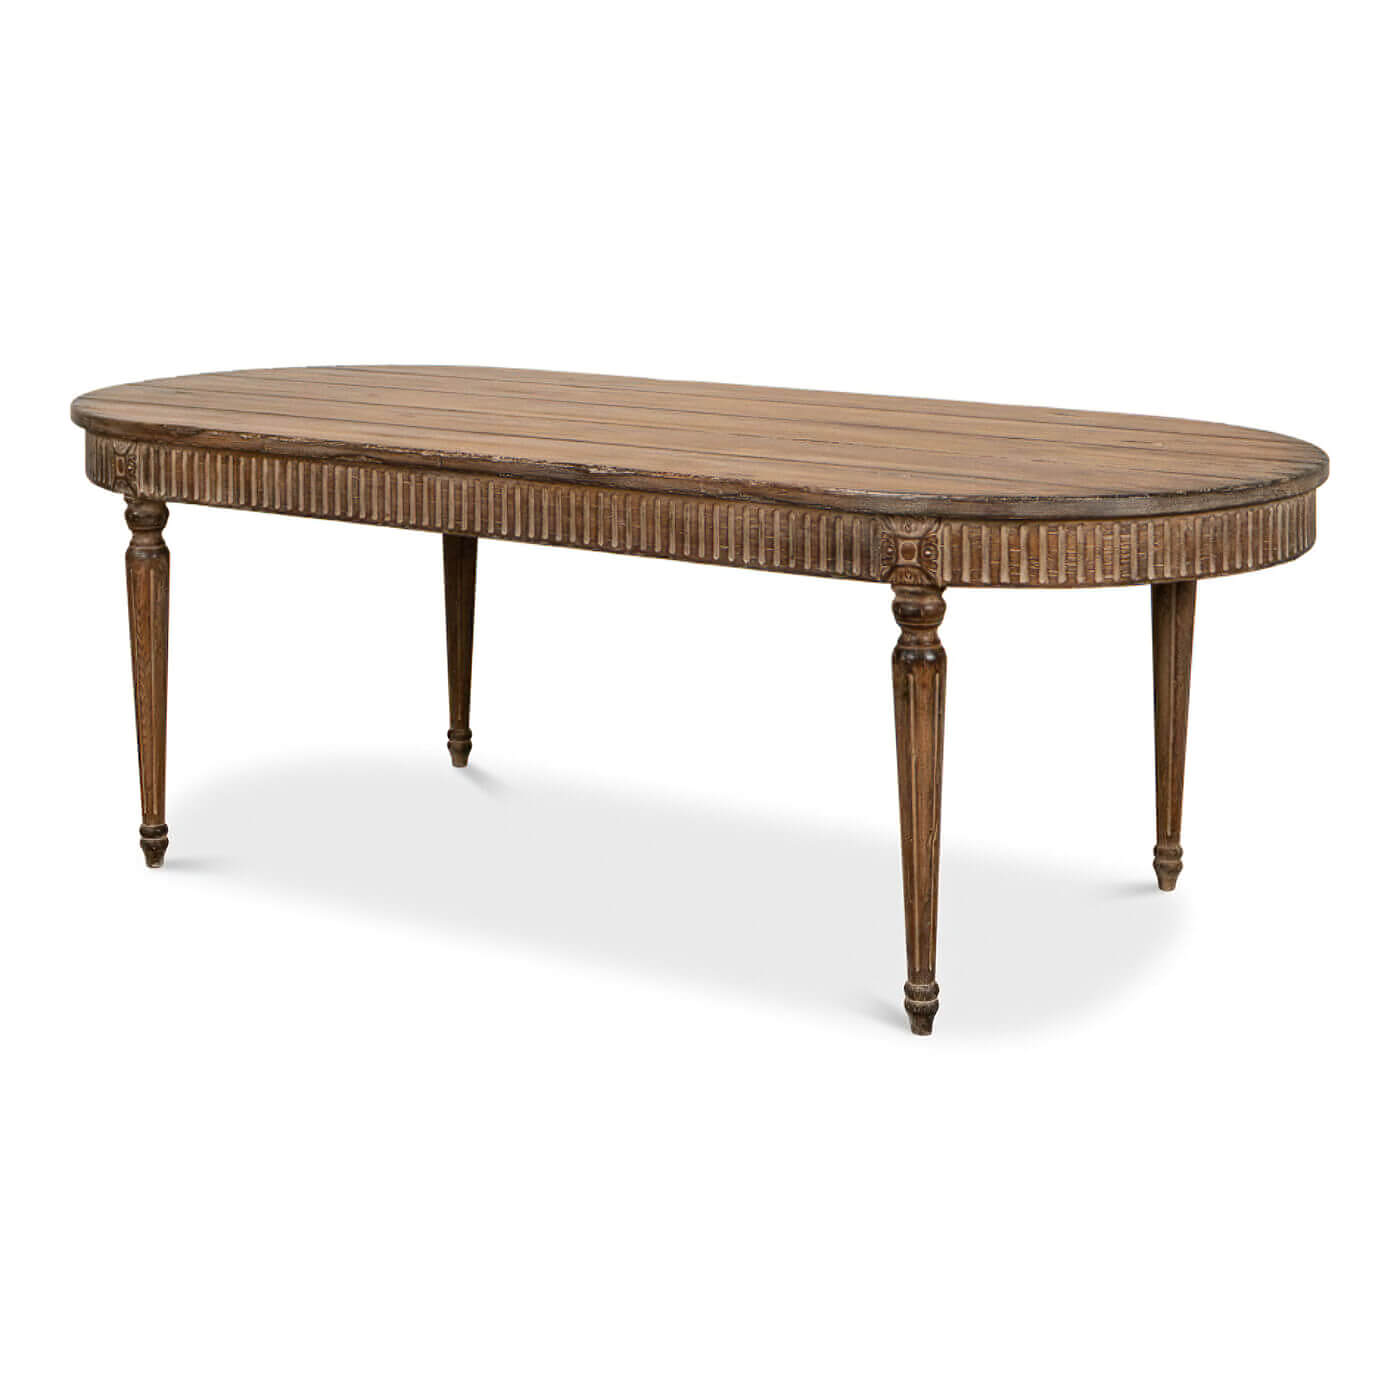 French Provincial Oval Dining Table - English Georgian America